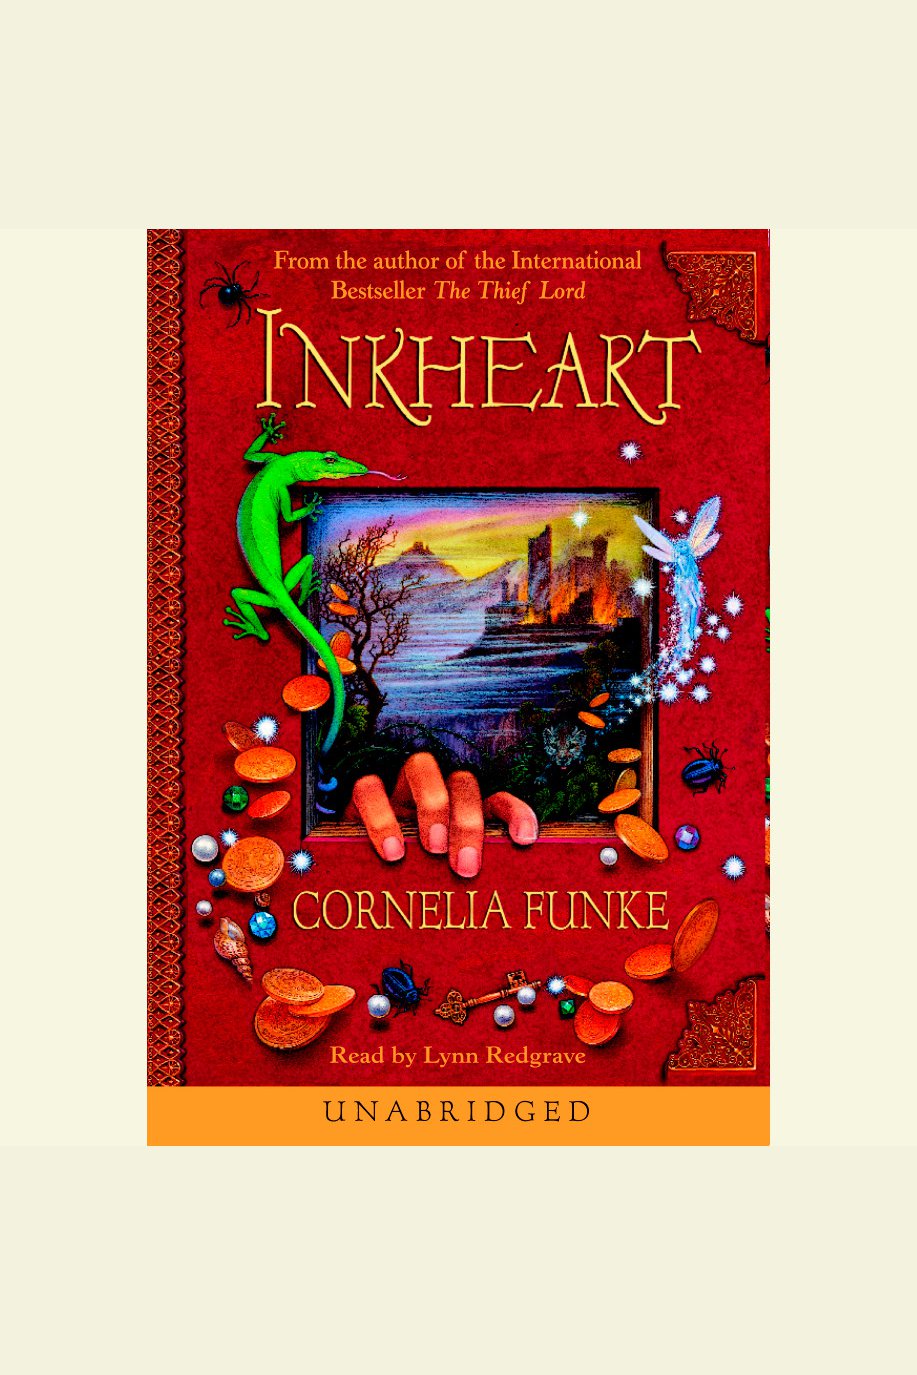 Inkheart cover image